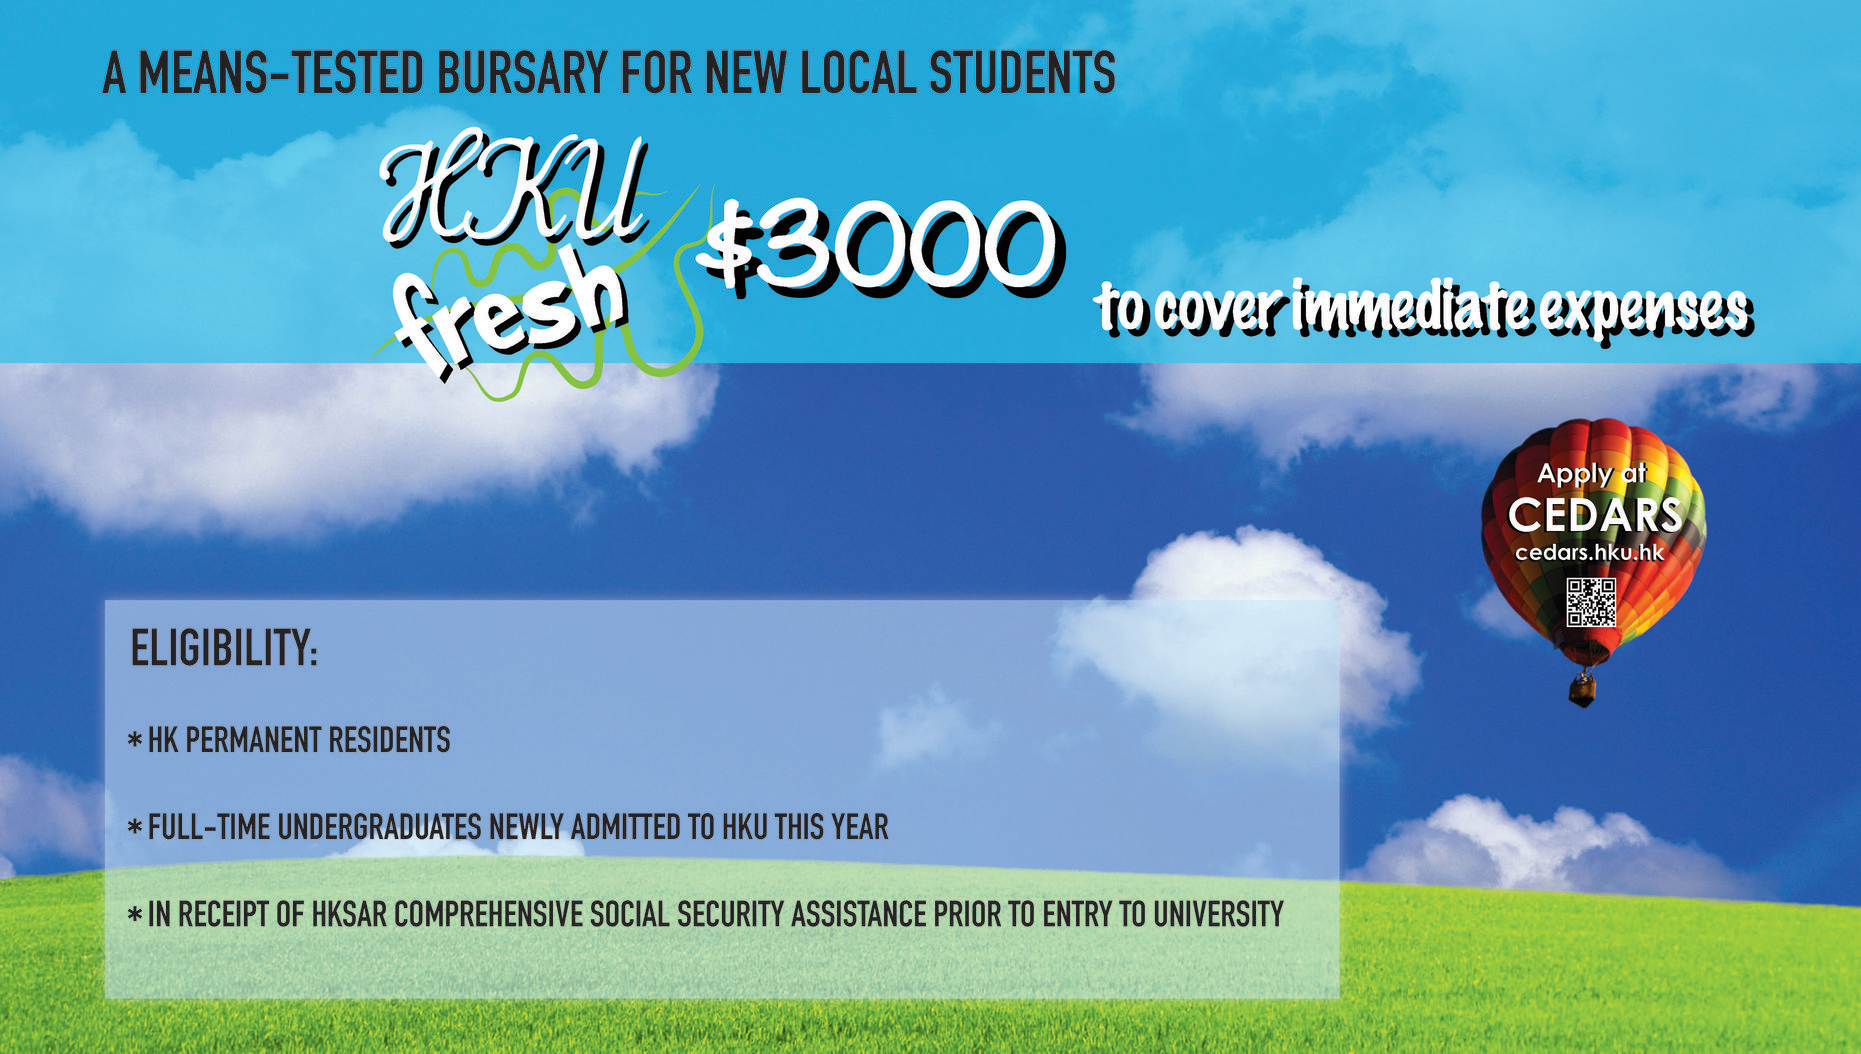 HKU Fresh $3000 - A means-tested bursary scheme for new local students